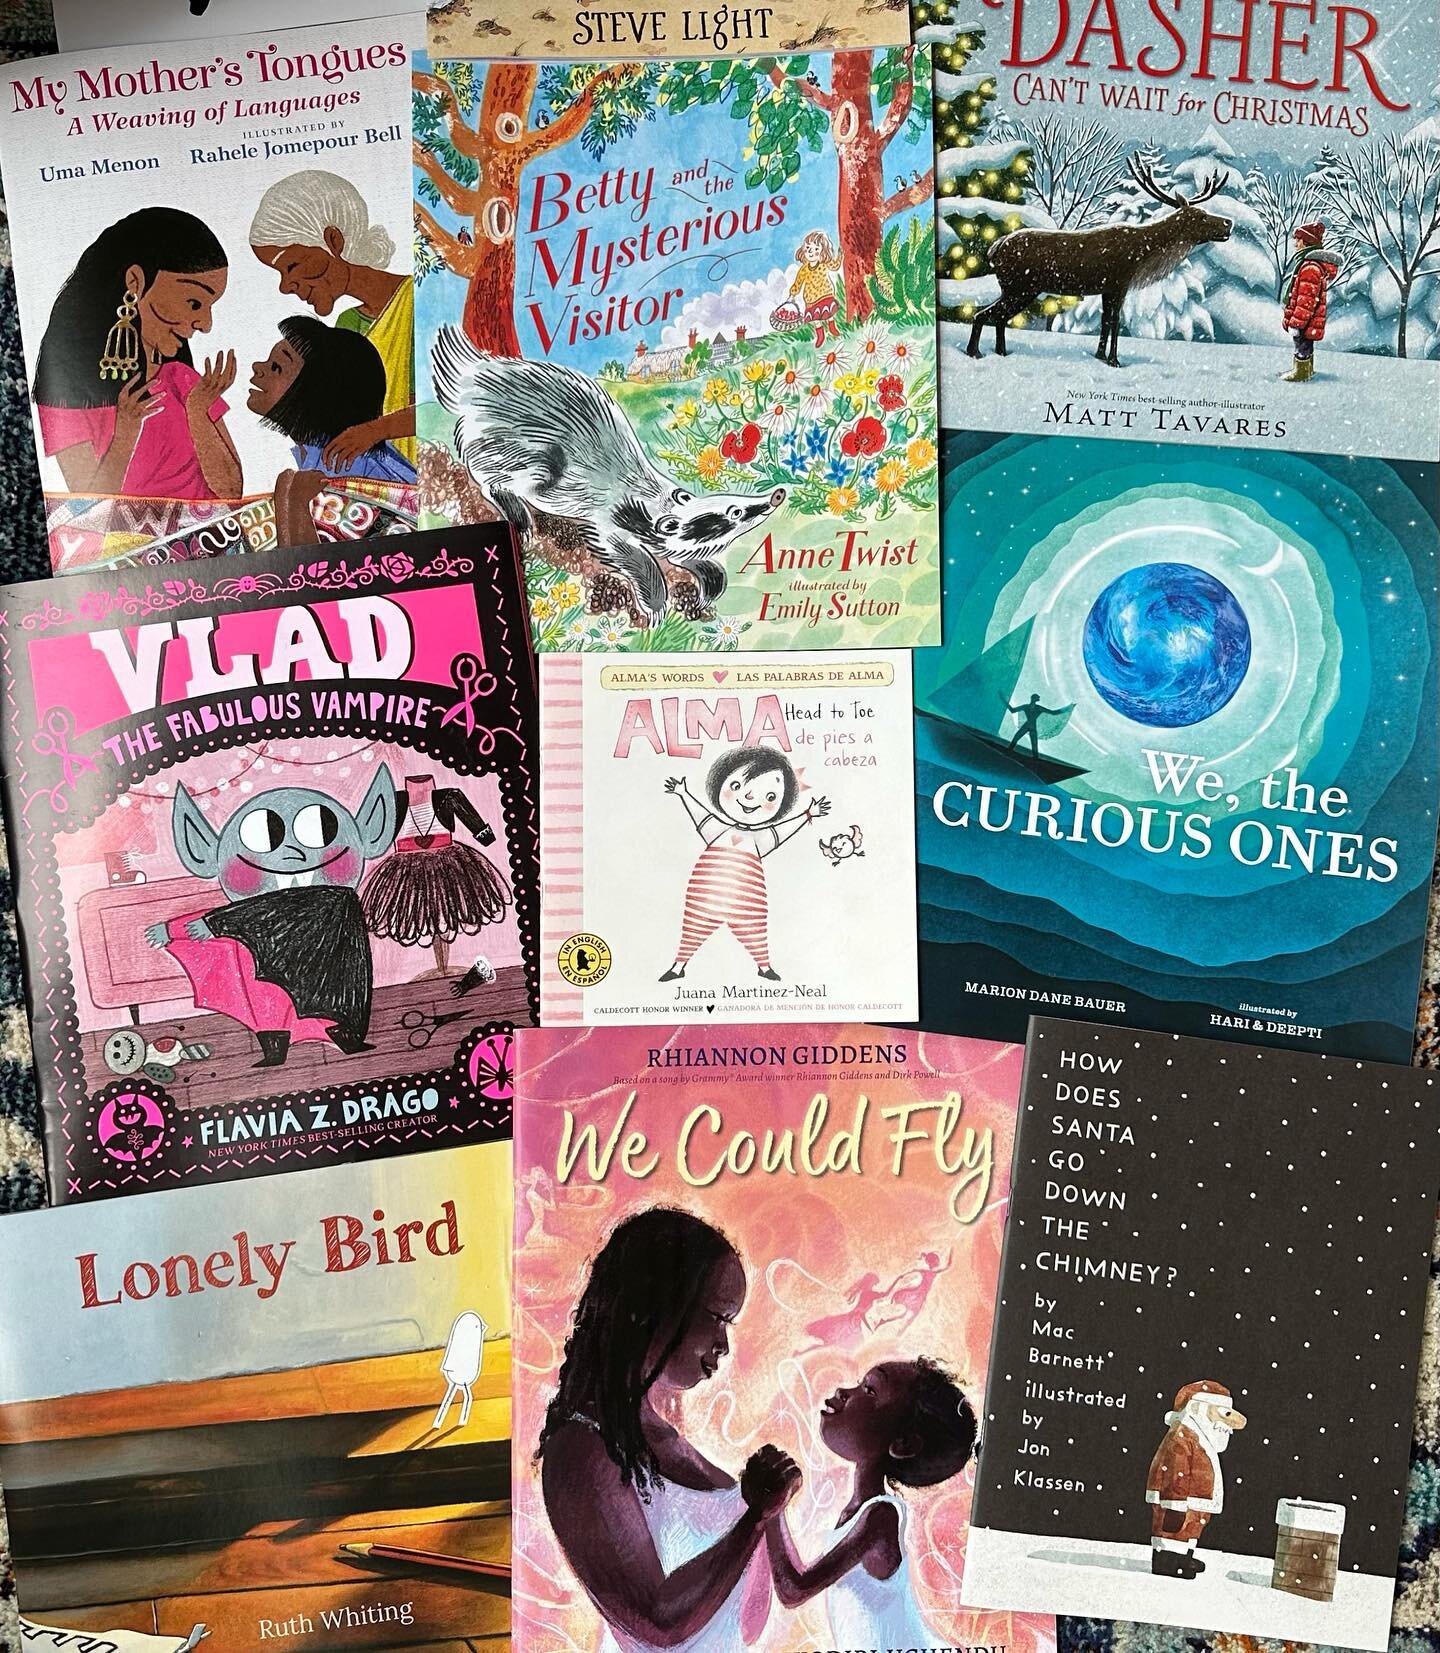 The Fall 23 books are looking 🔥🔥🔥

New picture books from @candlewickpress : My Mother&rsquo;s Tongues; Betty and the Mysterious Visitor; Dasher Can&rsquo;t Wait for Christmas; Vlad the Fabulous Vampire; Alma Head to Toe; We, the Curious Ones; Lon